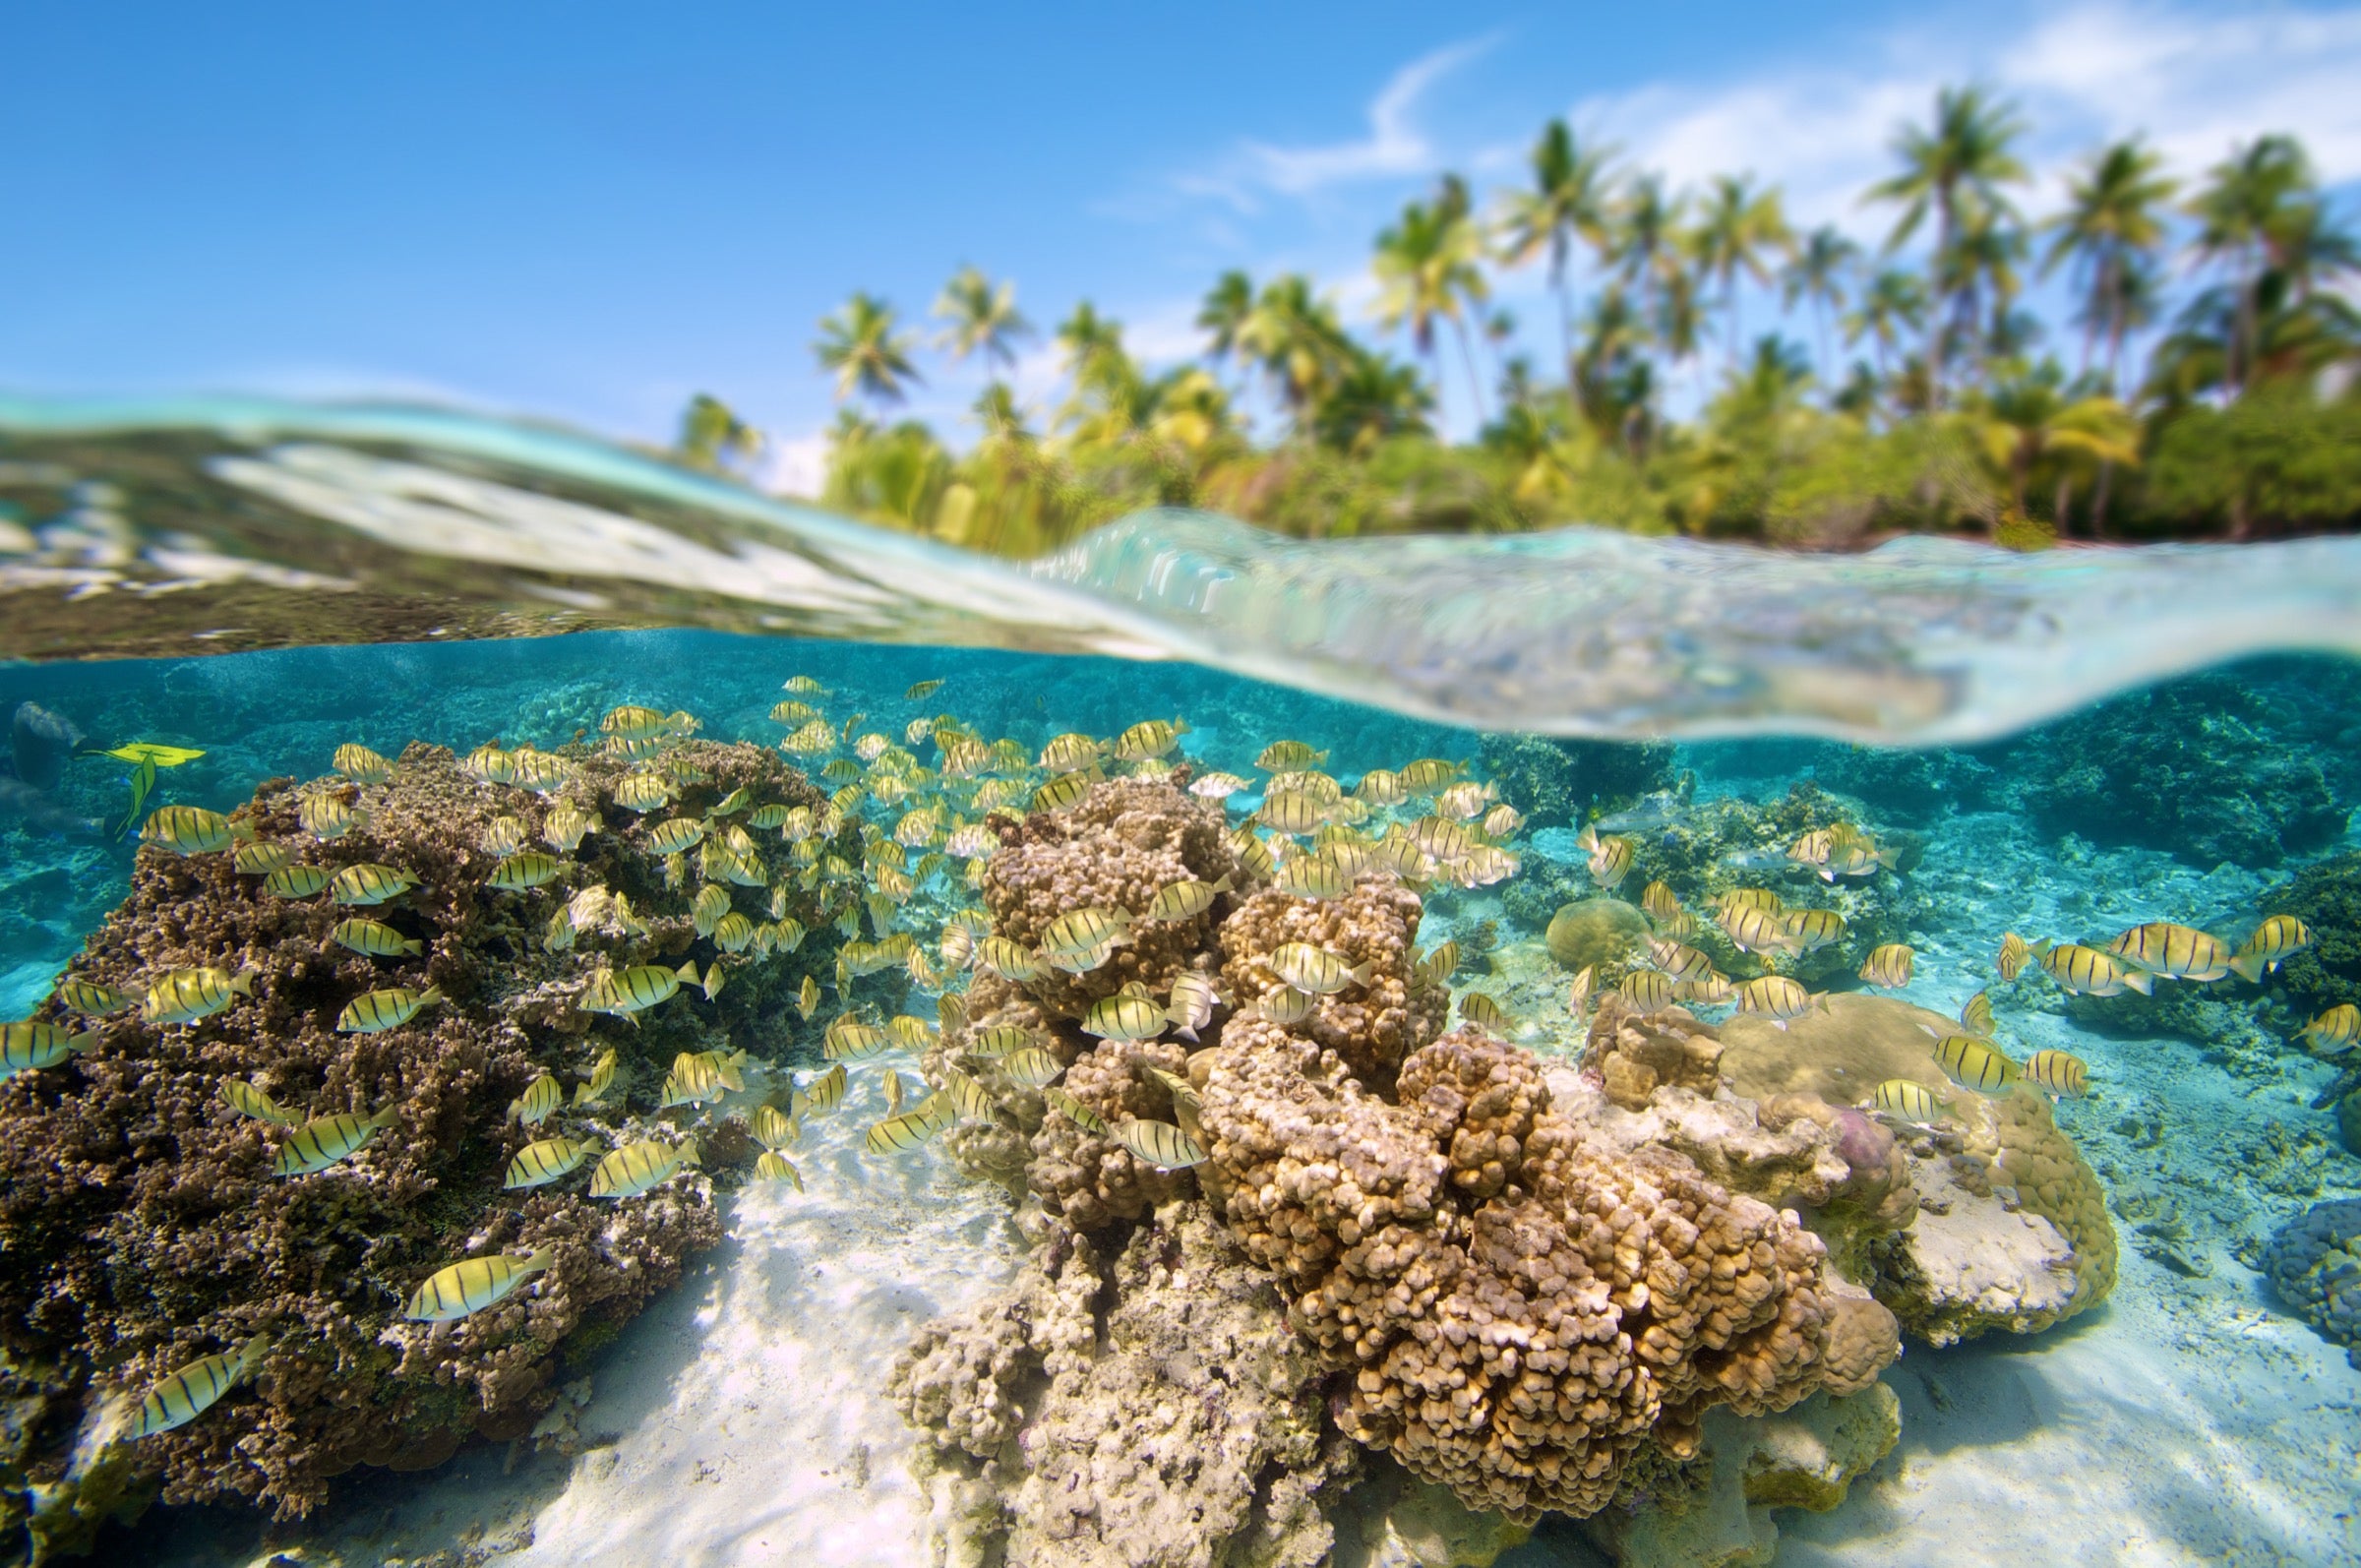 We should protect coral reefs